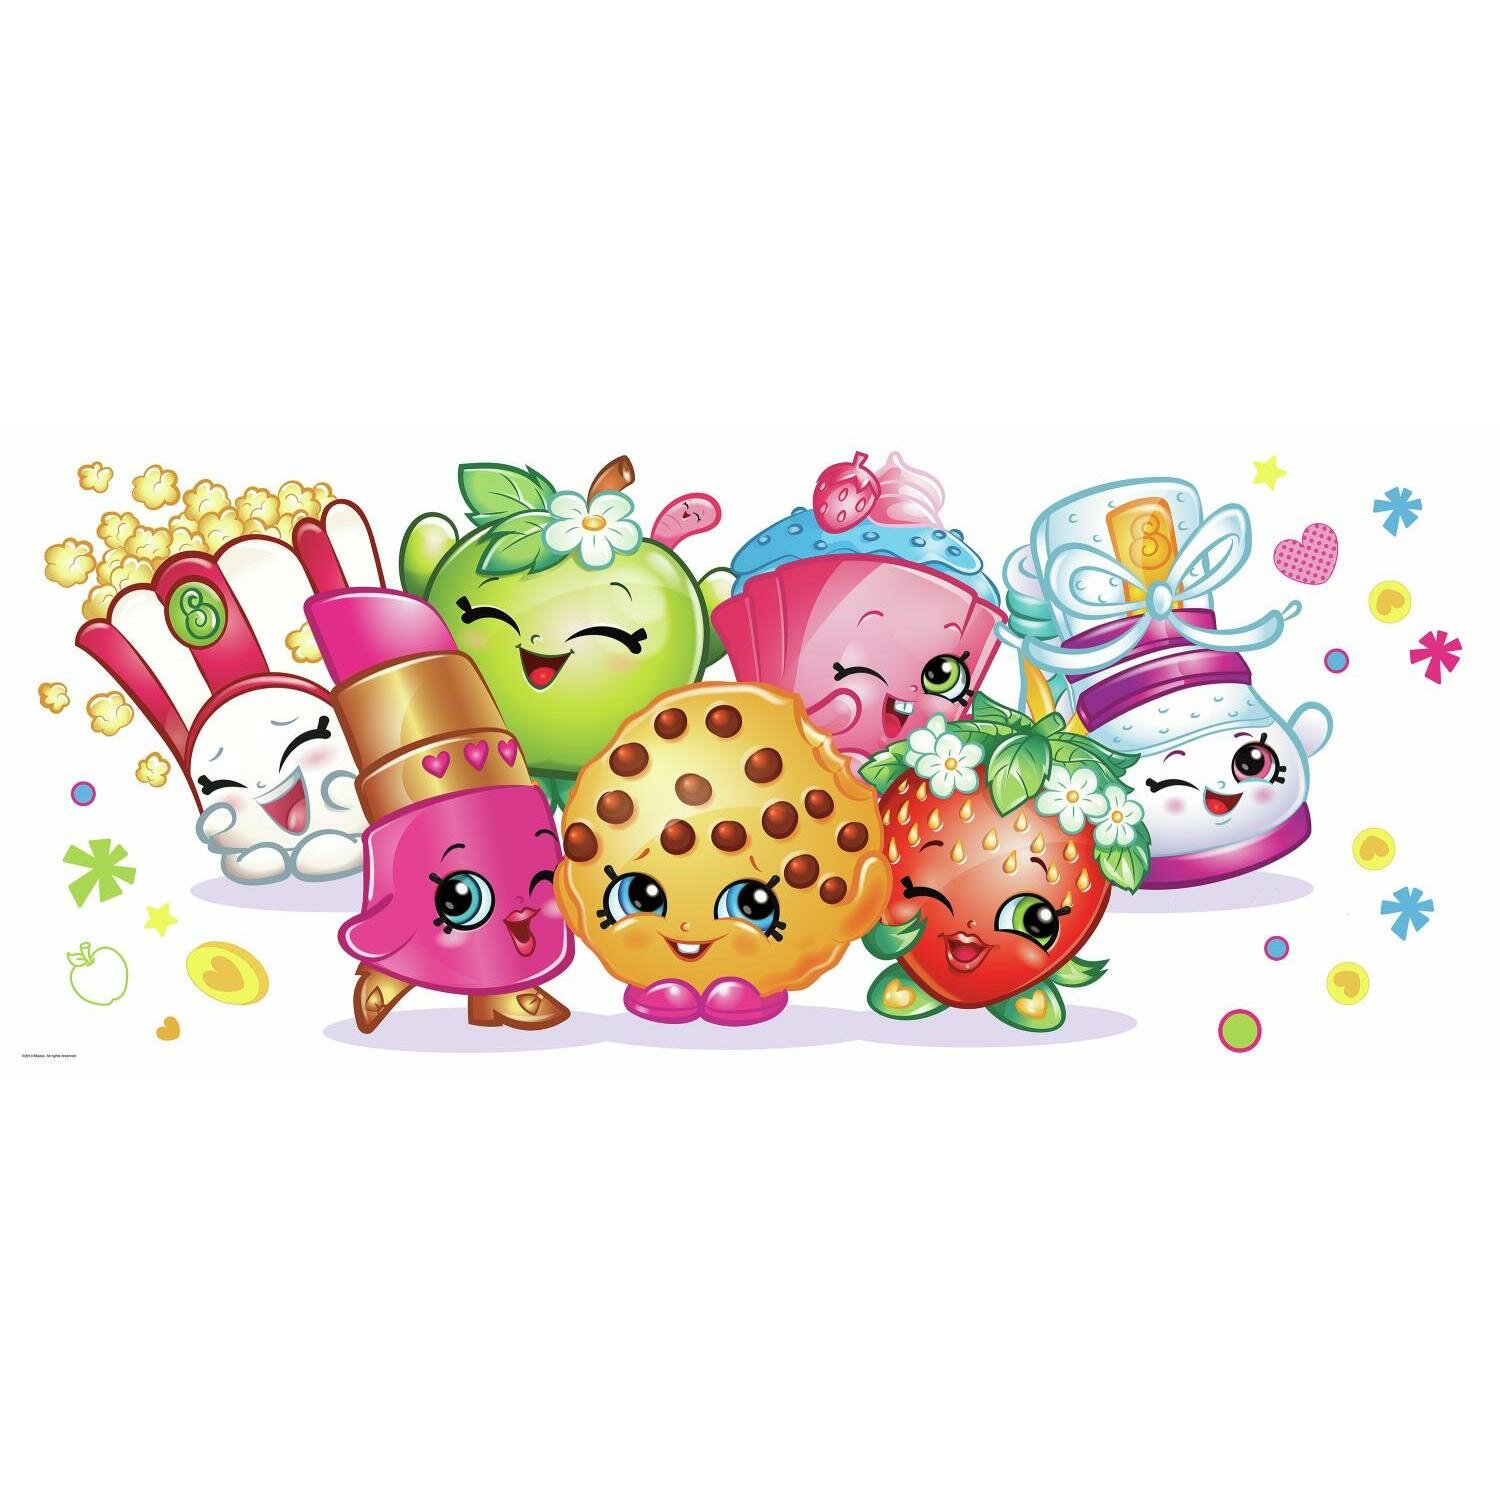 RoomMates Shopkins Pals Peel And Stick Giant Wall Graphic